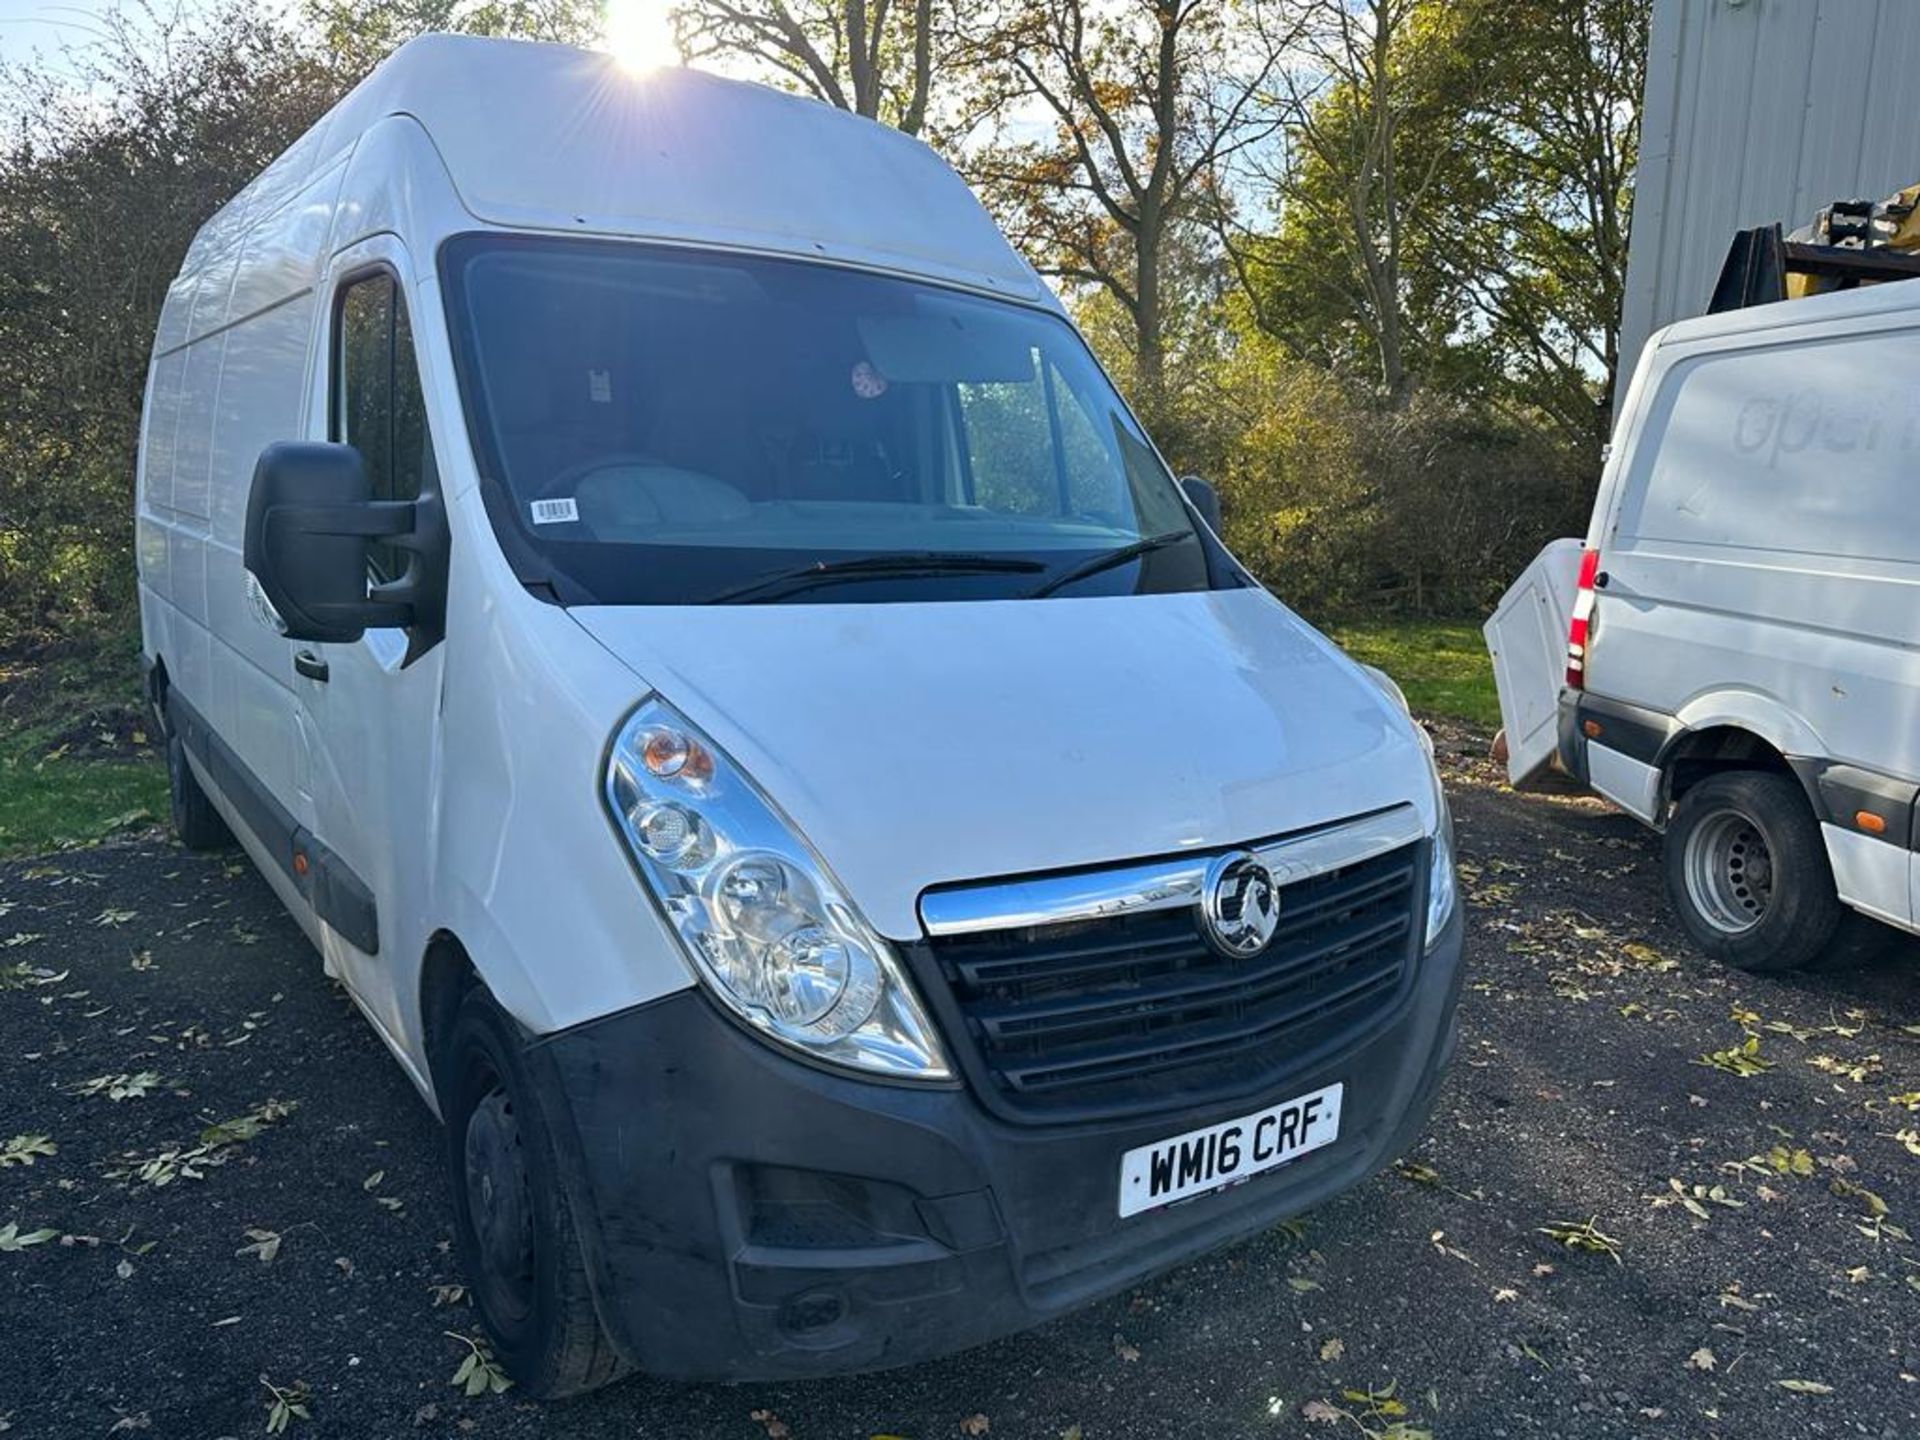 2016 16 VAUXHALL MOVANO PANEL VAN - L3 H3 MODEL - 118K MILES - PLY LINED - Image 9 of 10